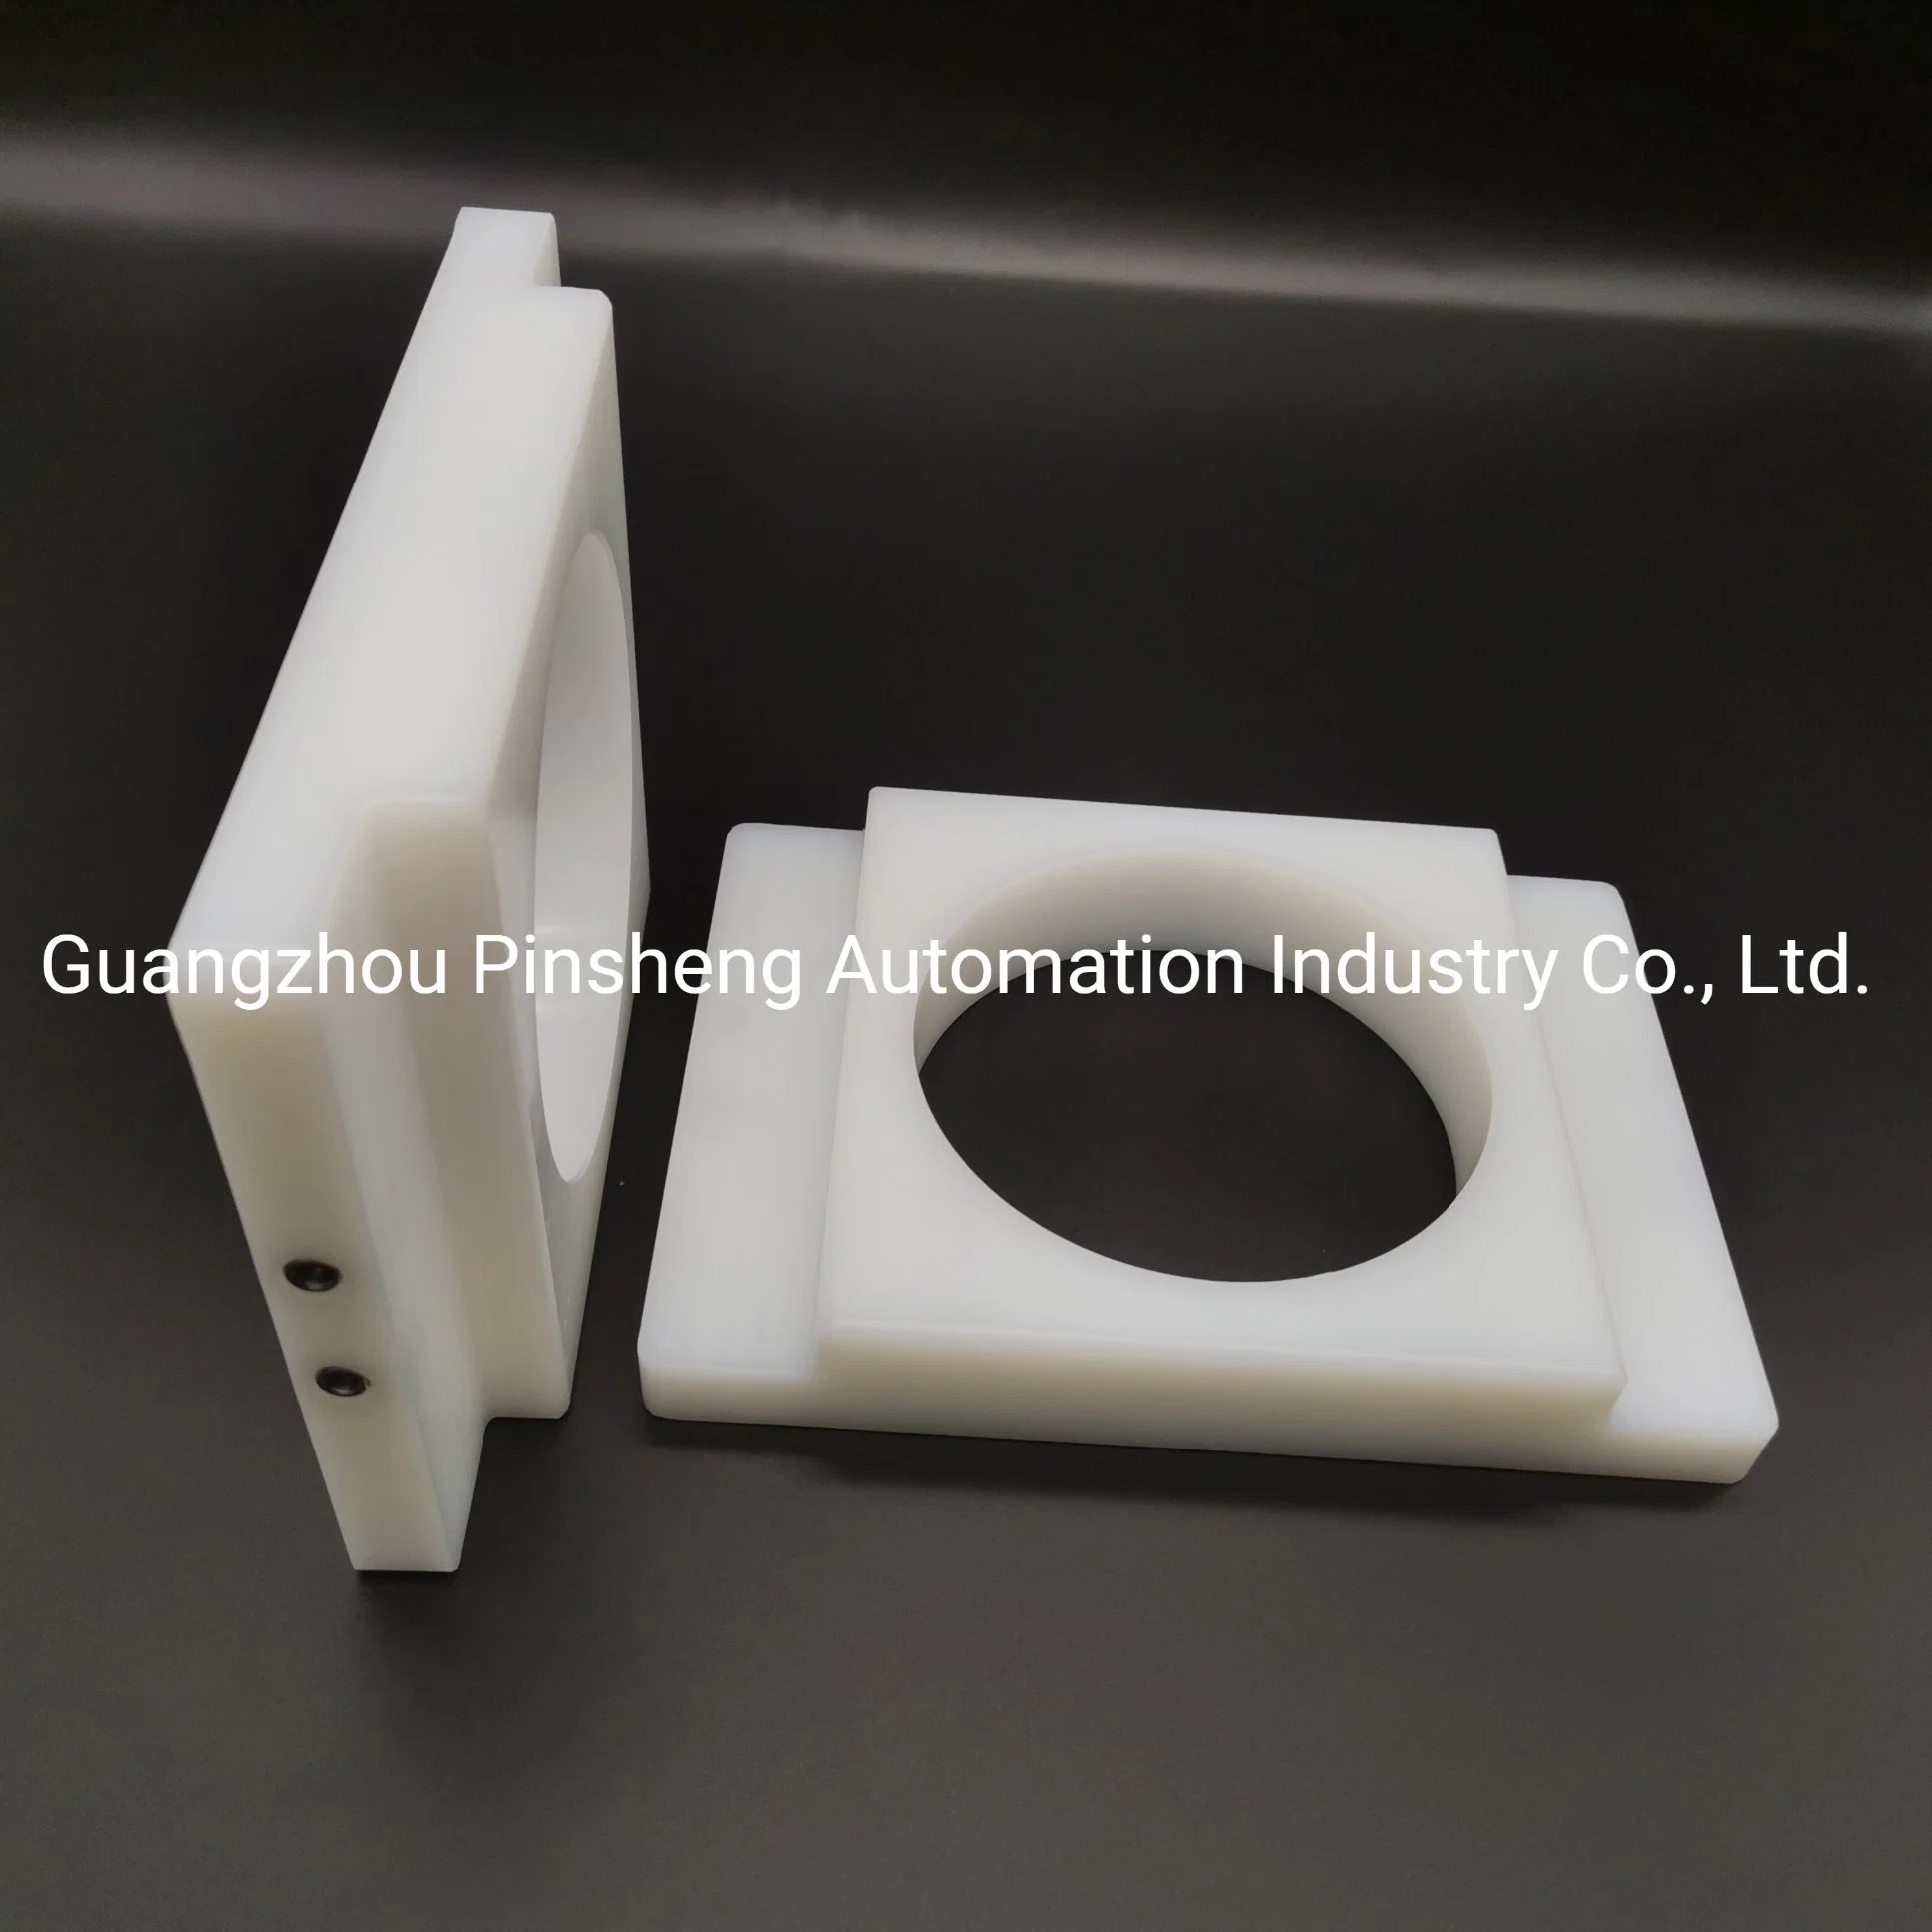 CNC Precision Machine Plus UHMWPE and Other Engineering Plastic Accessories